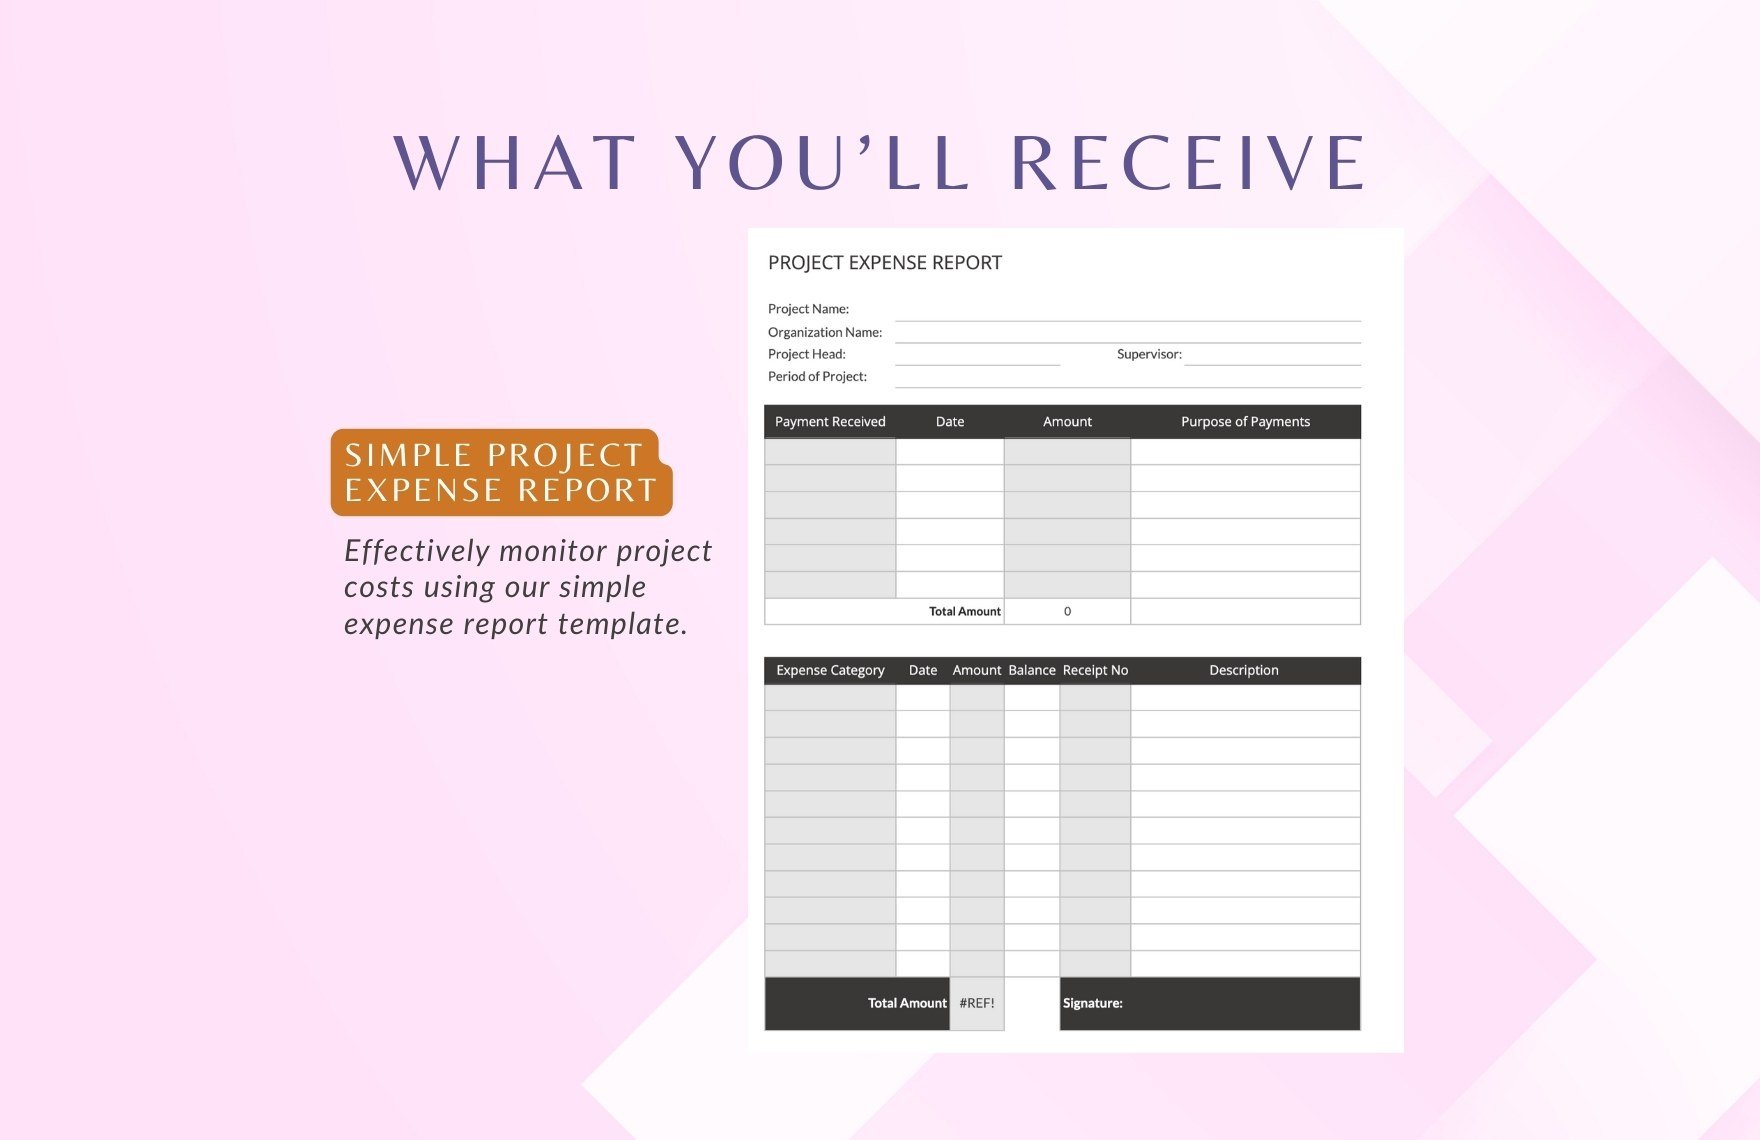 Simple Project Expense Report Template